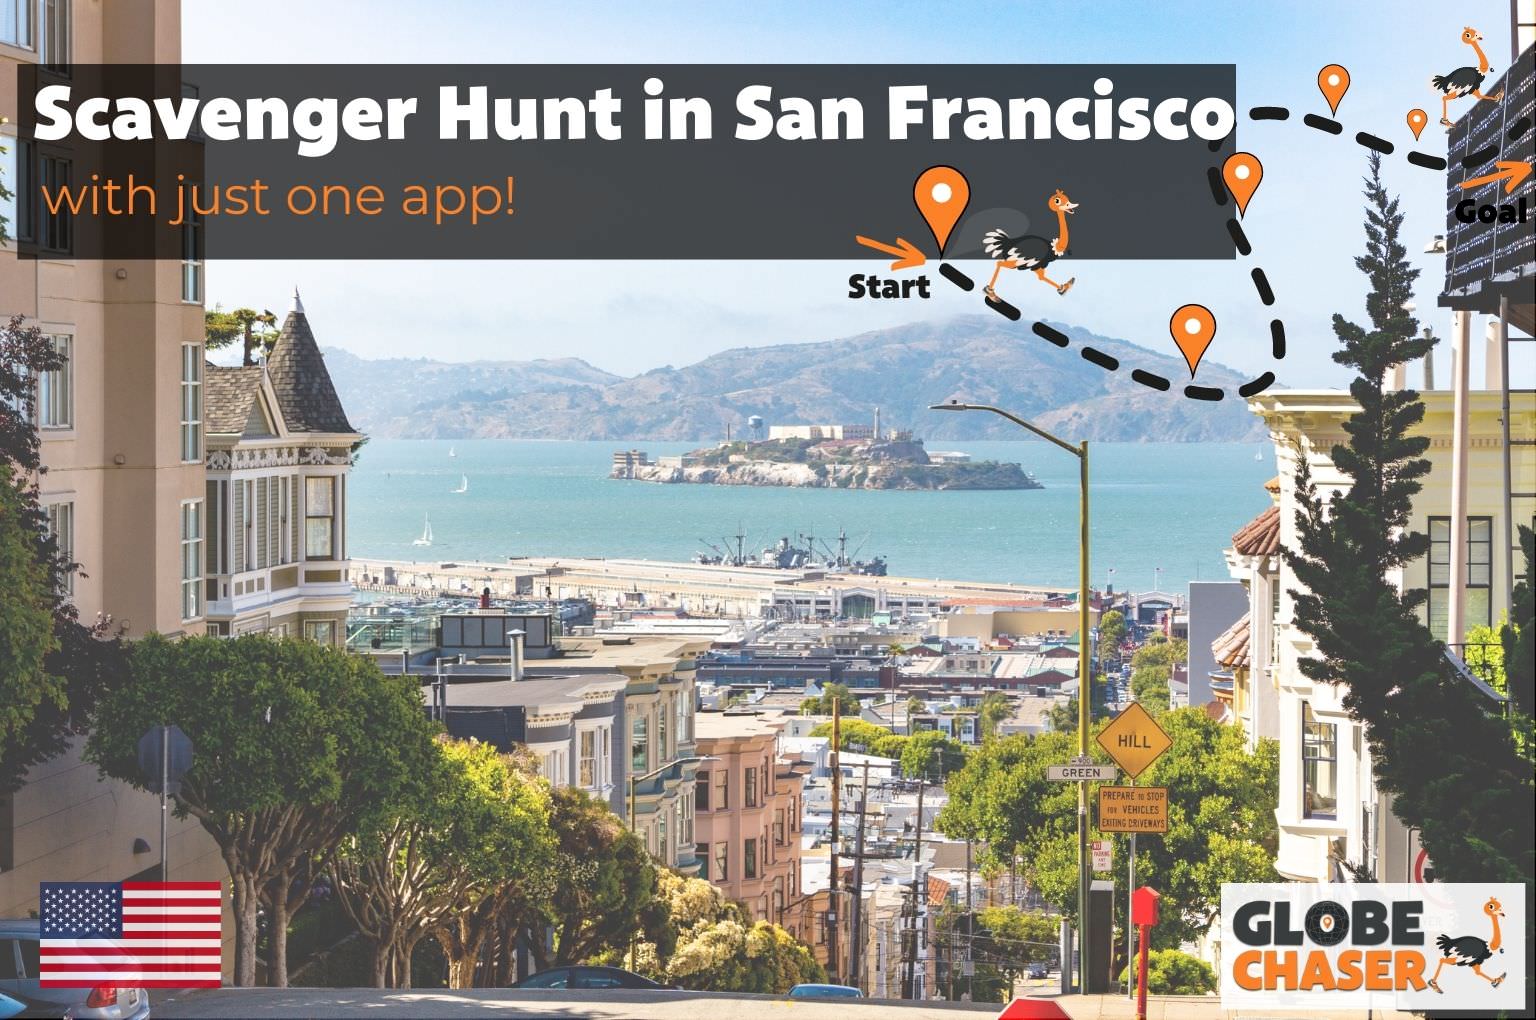 Scavenger Hunt in San Francisco, USA - Family Activities with the Globe Chaser App for Outdoor Fun